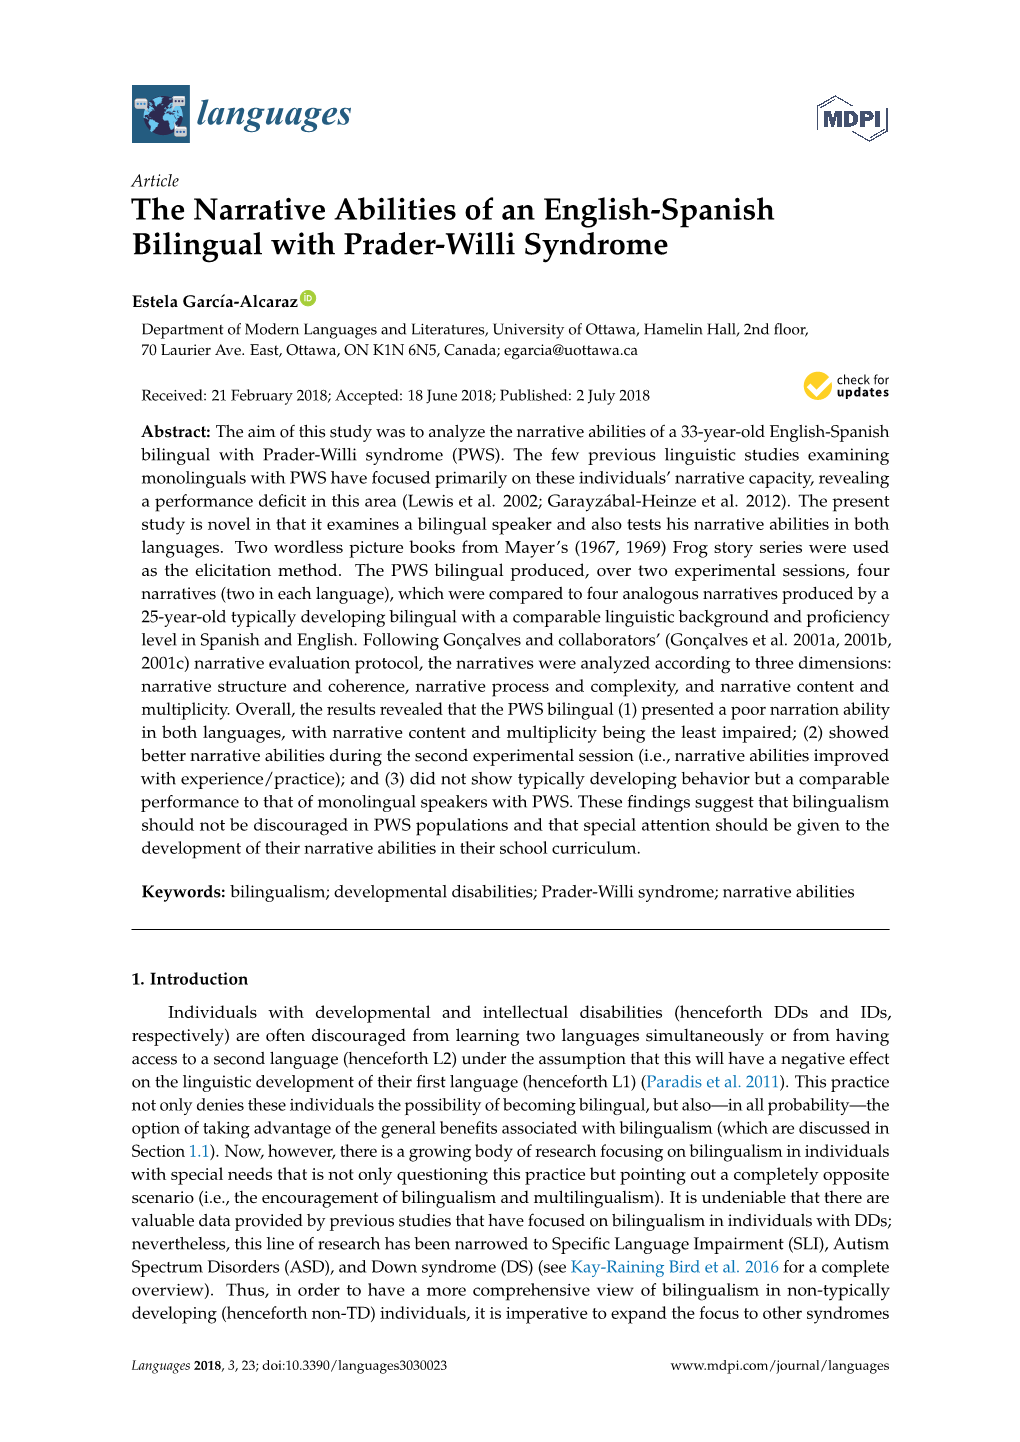 The Narrative Abilities of an English-Spanish Bilingual with Prader-Willi Syndrome